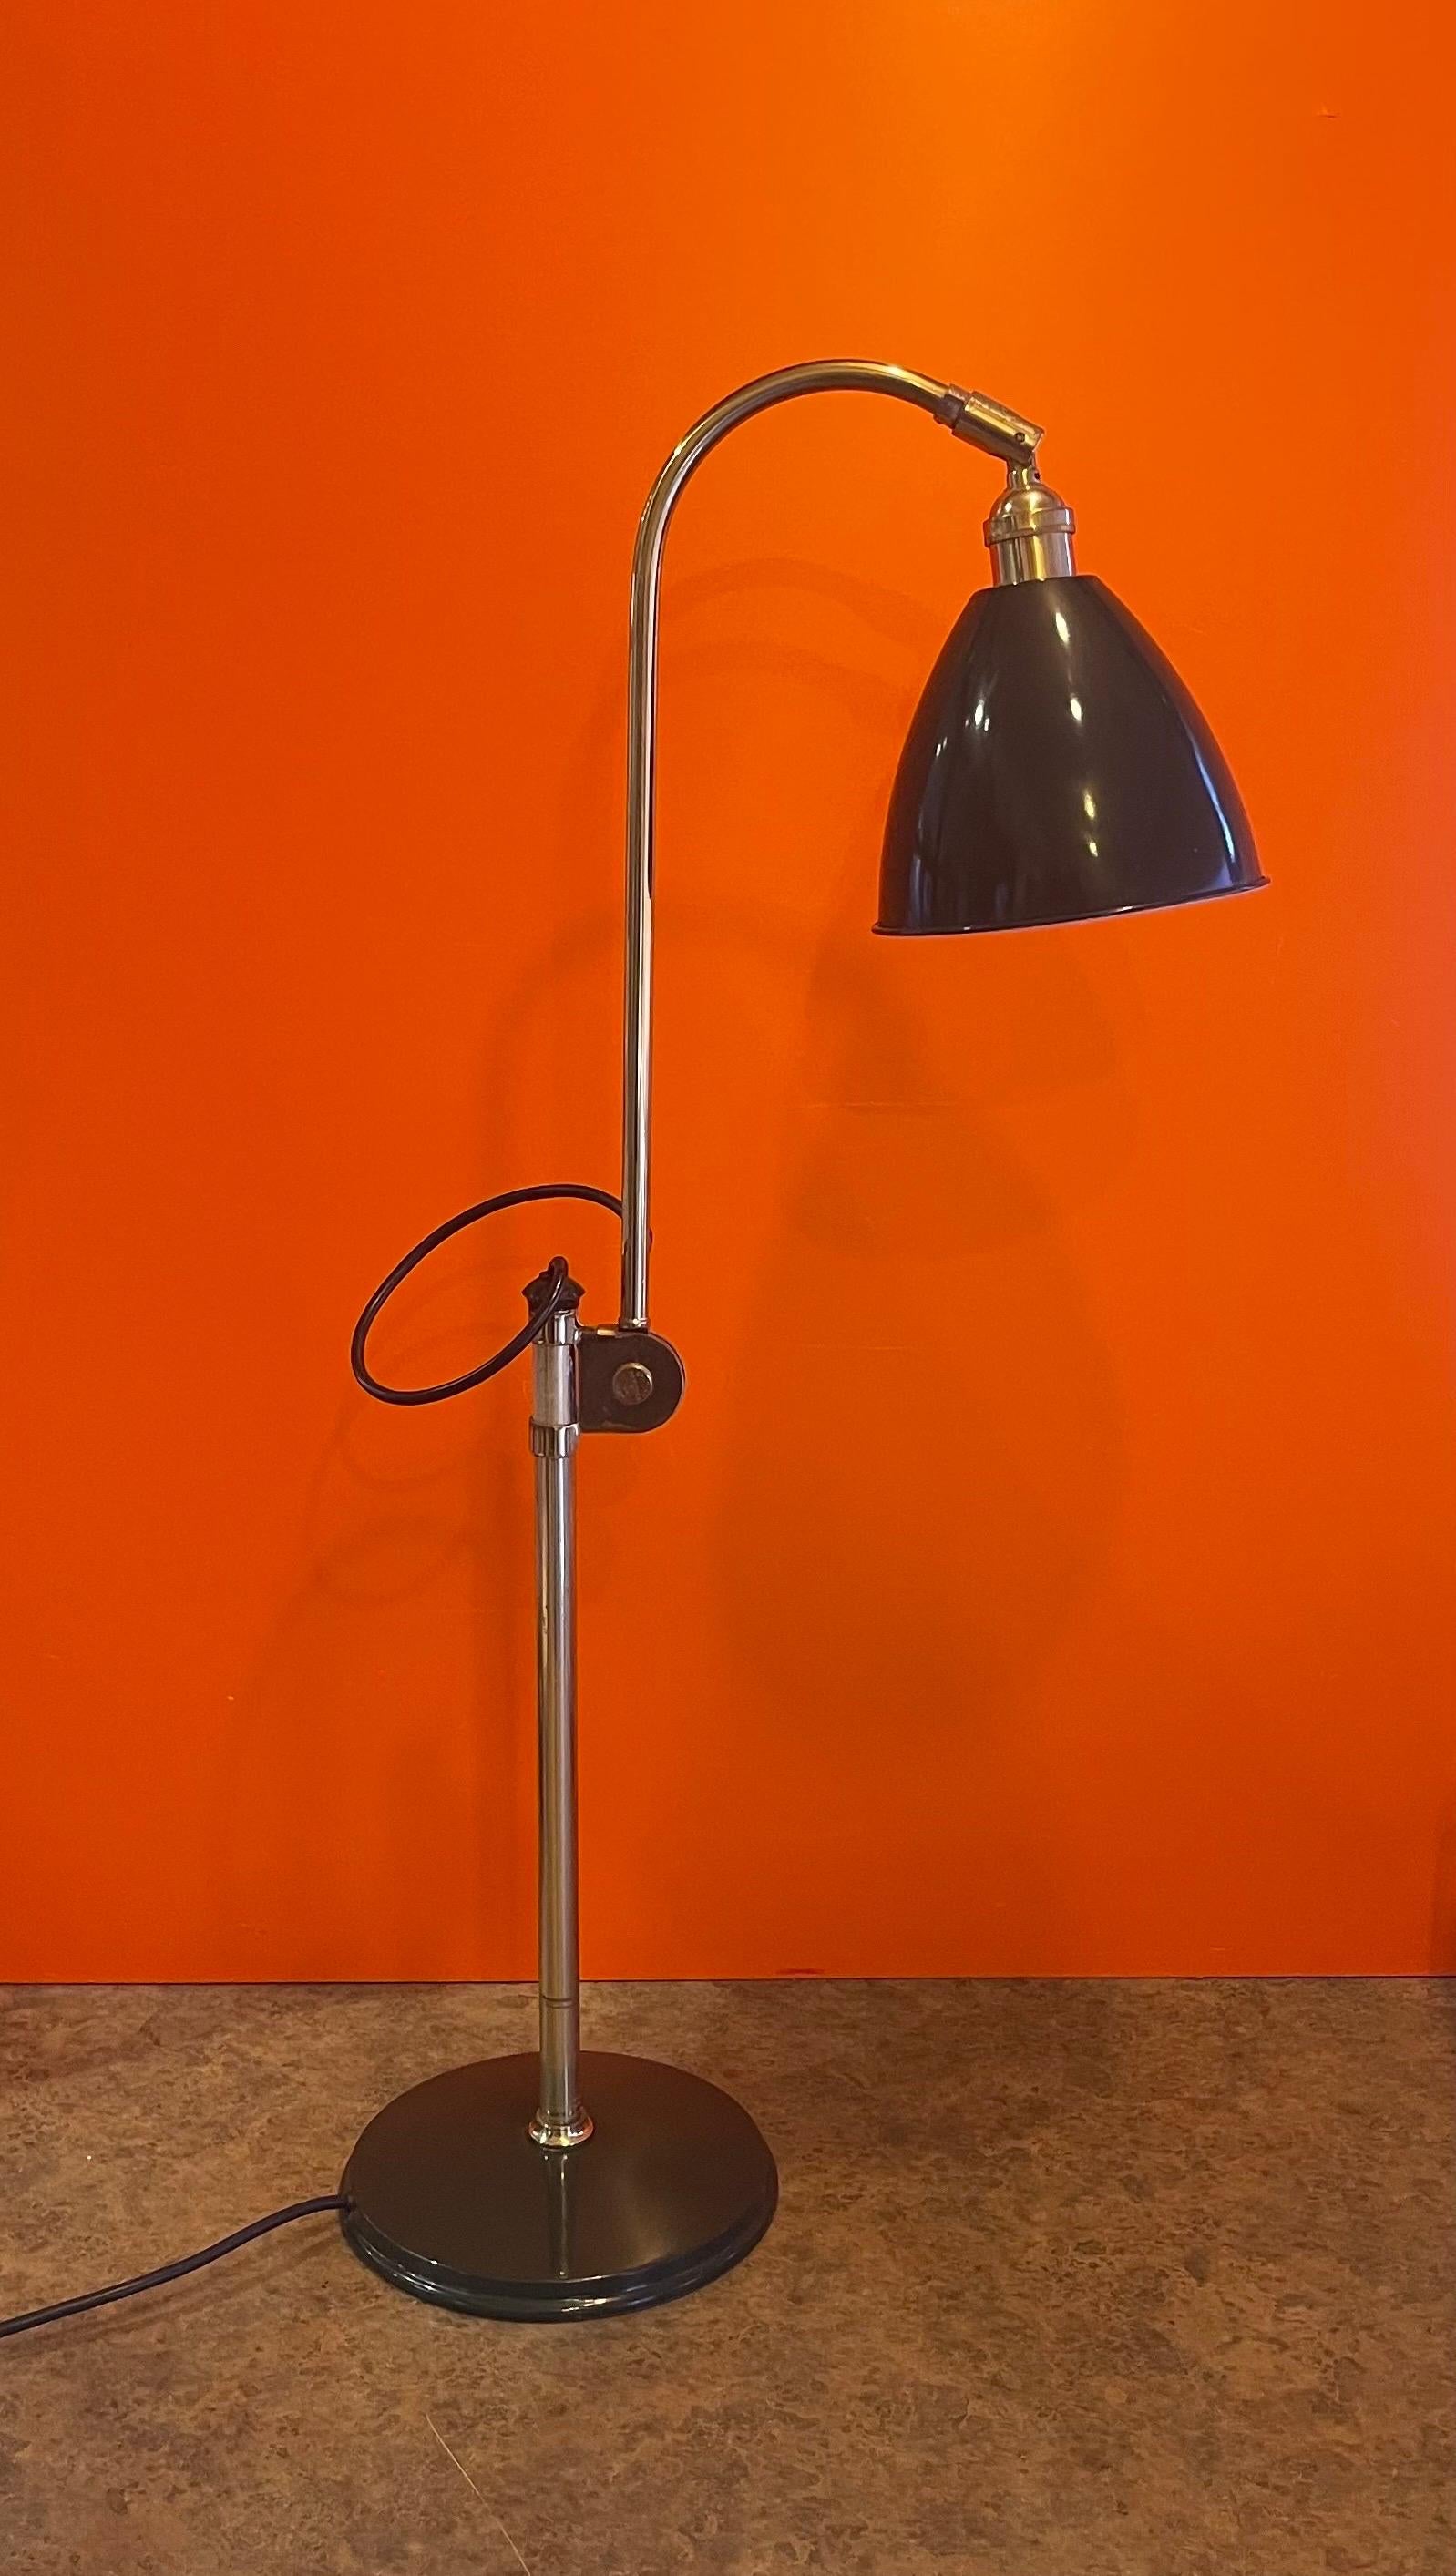 A very cool architectural drawing desk lamp by Louis Baldinger, circa 1980s. The piece is in good vintage condition and made of green painted sheet metal with brass accents and bars. The lamp is fully articulated at lamp hood and center of stem and